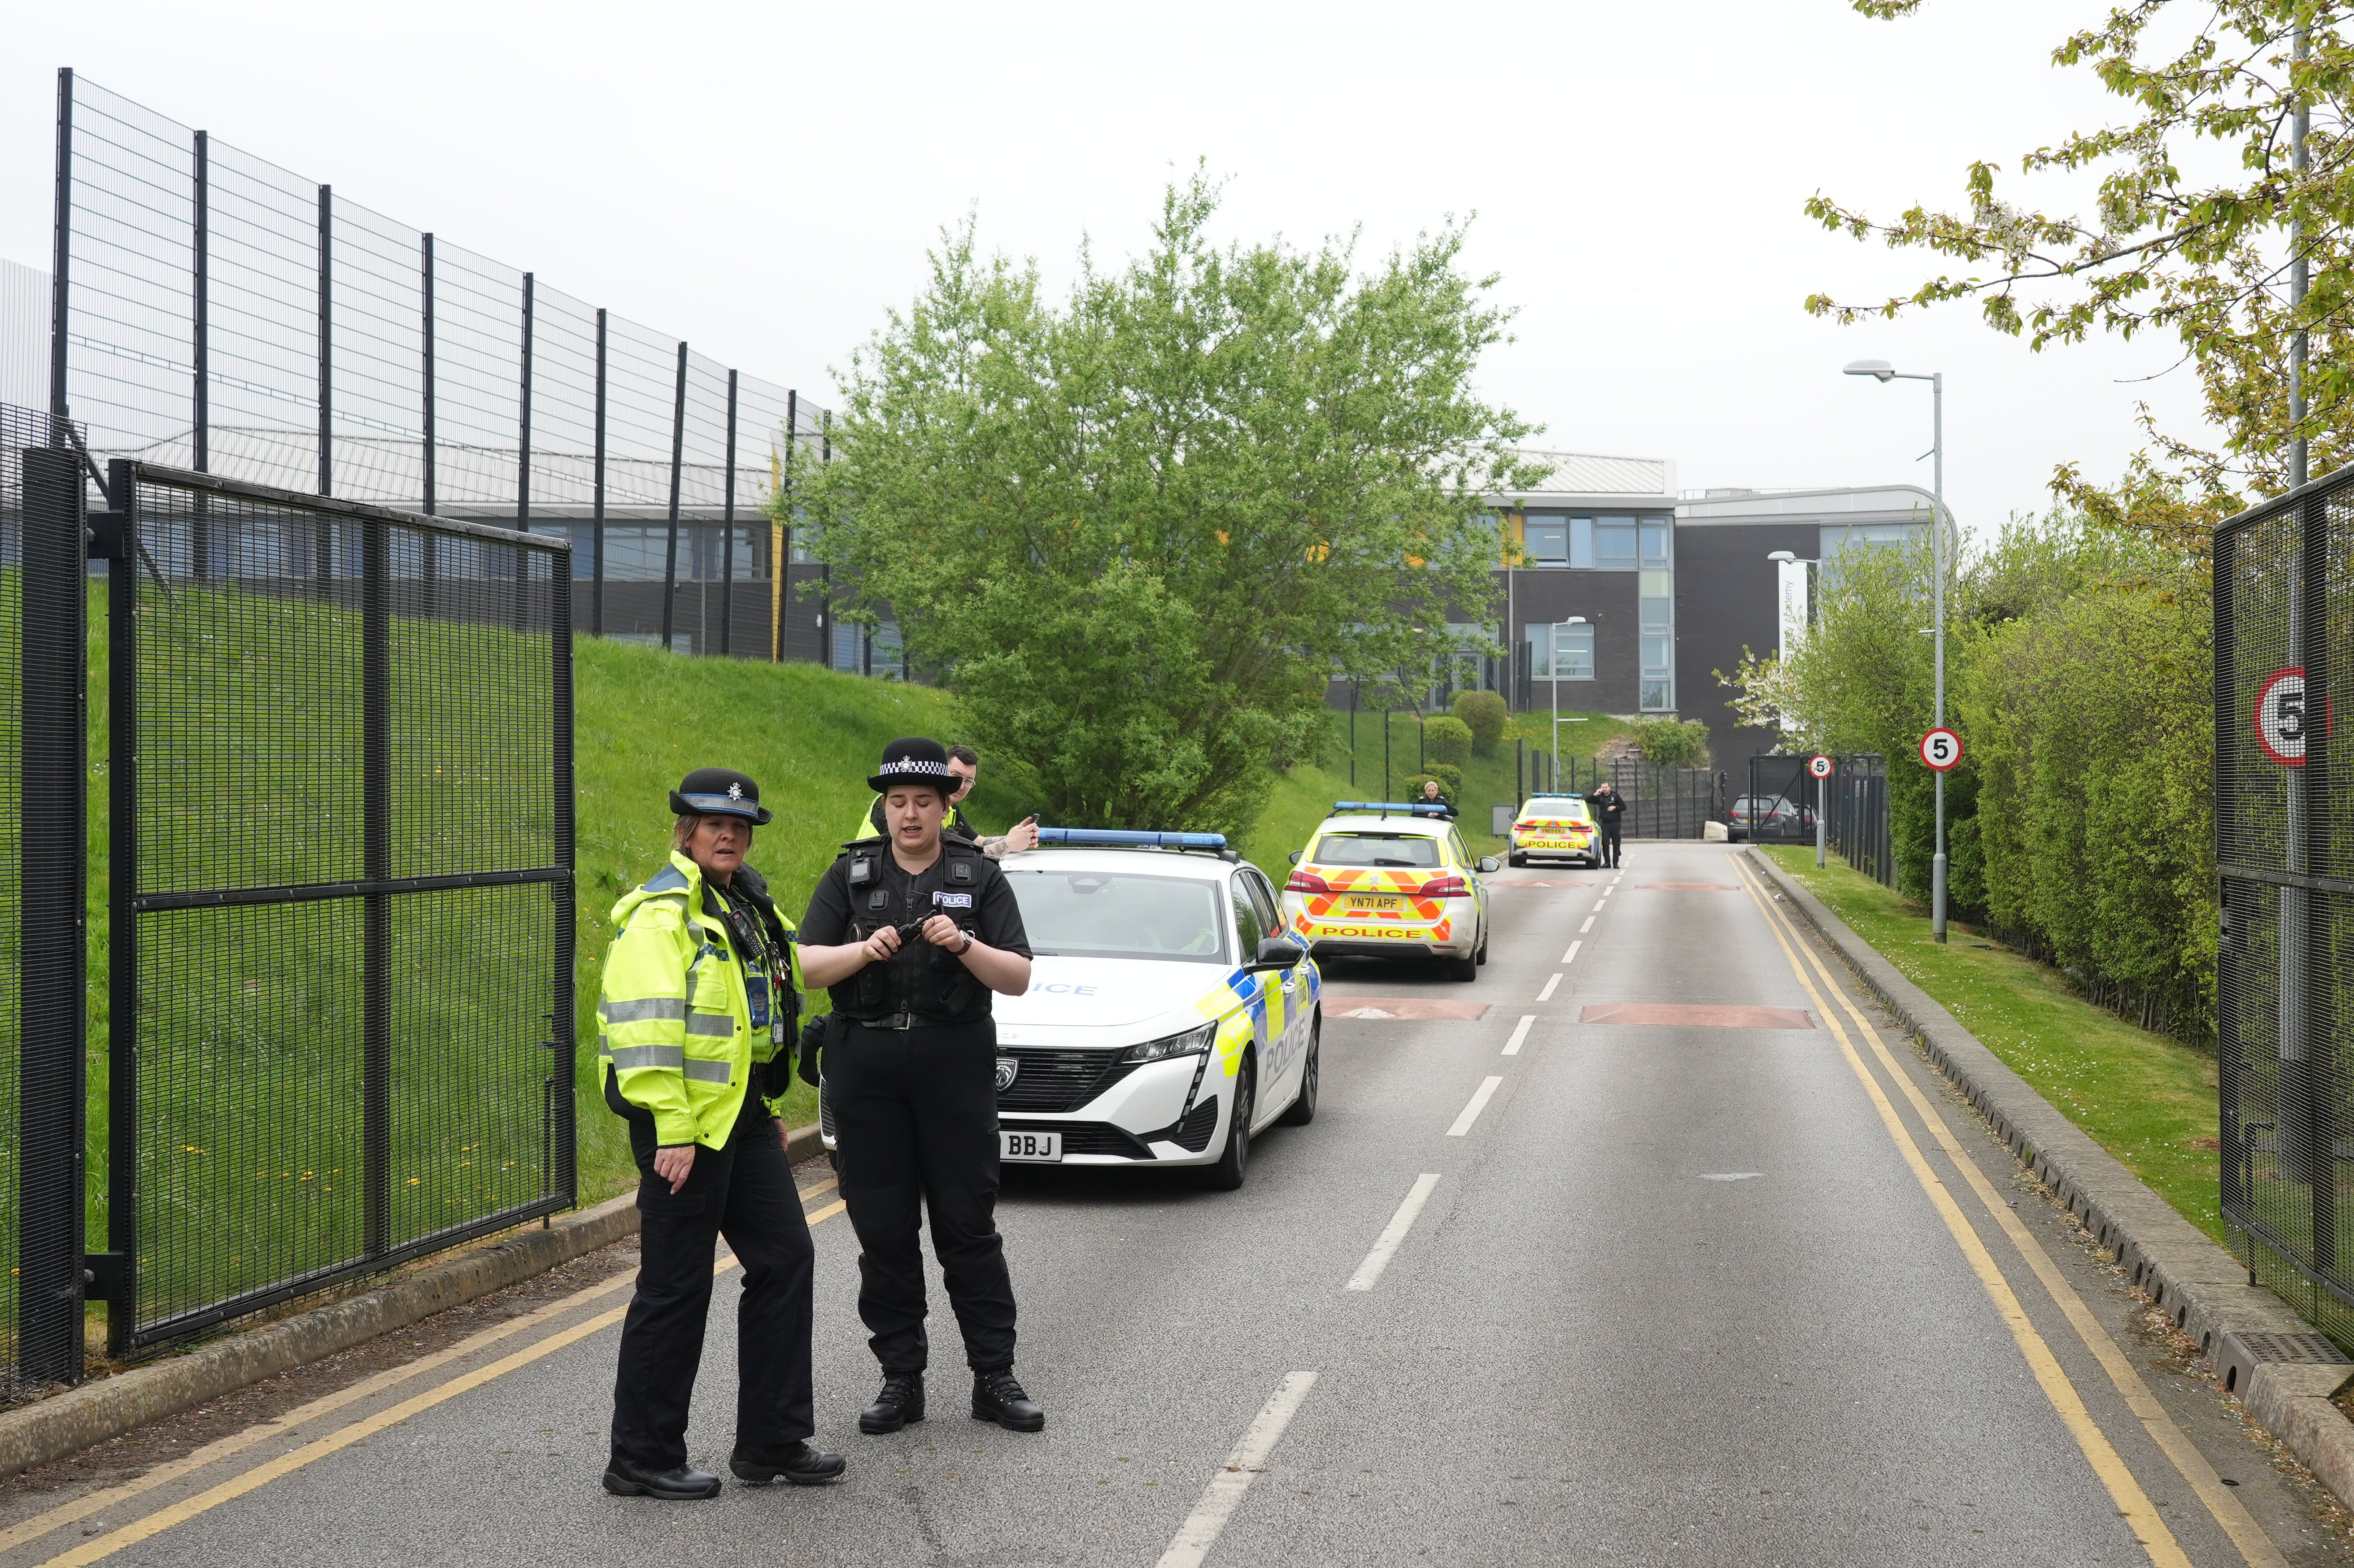 A 17-year-old boy has been arrested on suspicion of attempted murder after the attack at Birley Academy